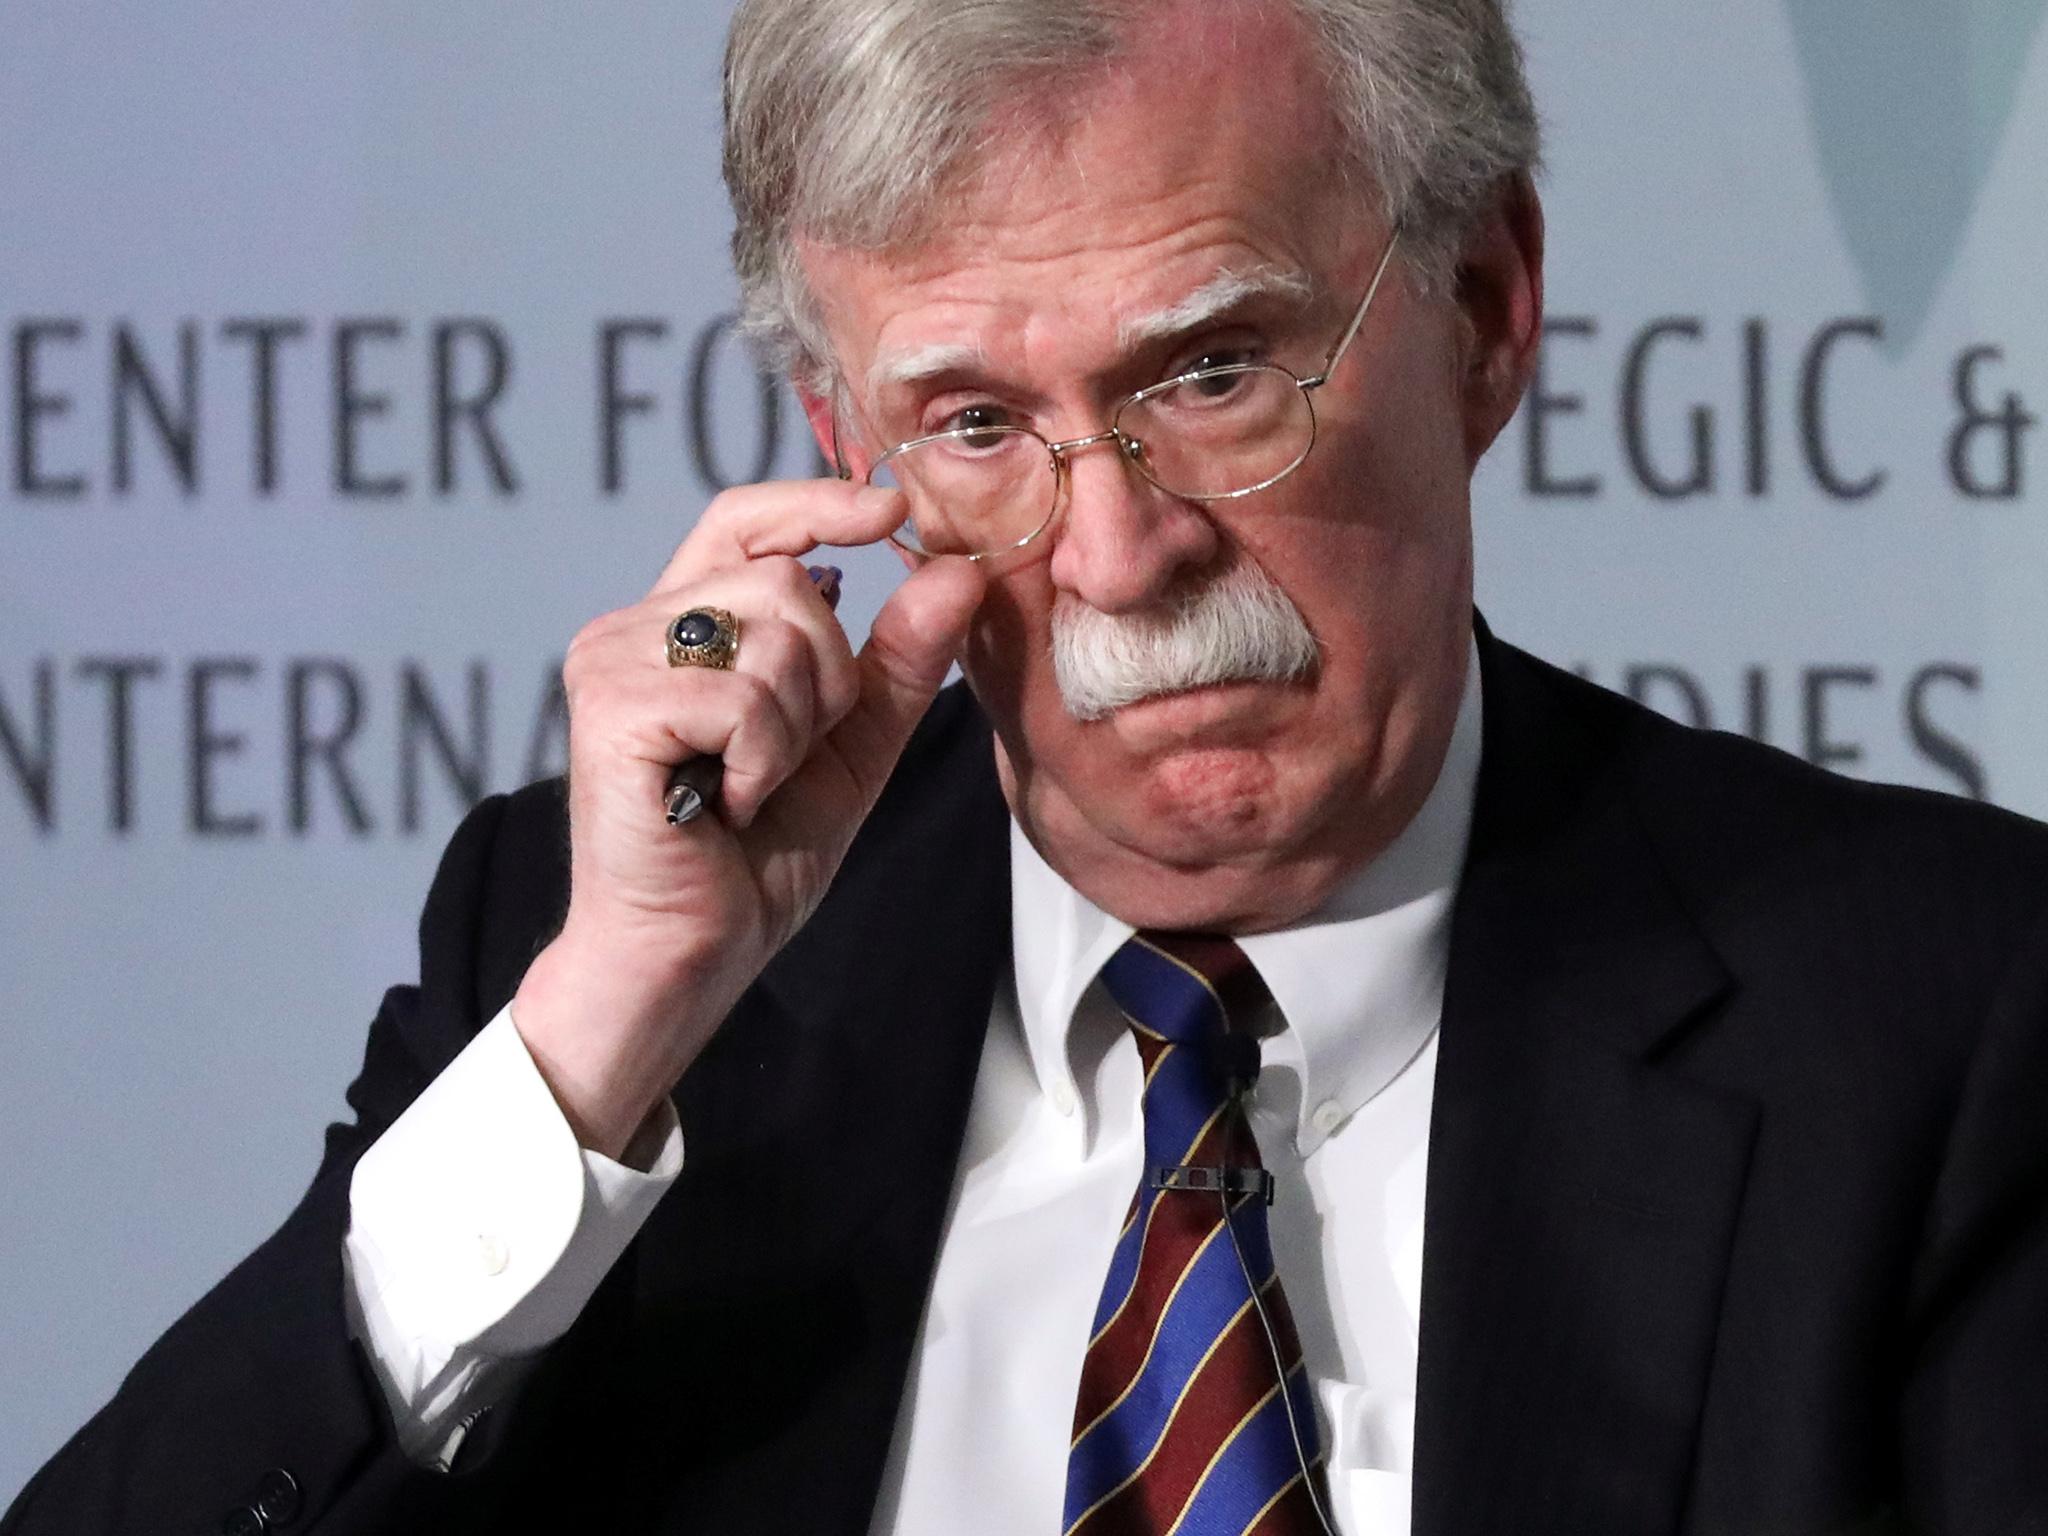 John Bolton: Former national security adviser will testify in Trump impeachment probe, reports say